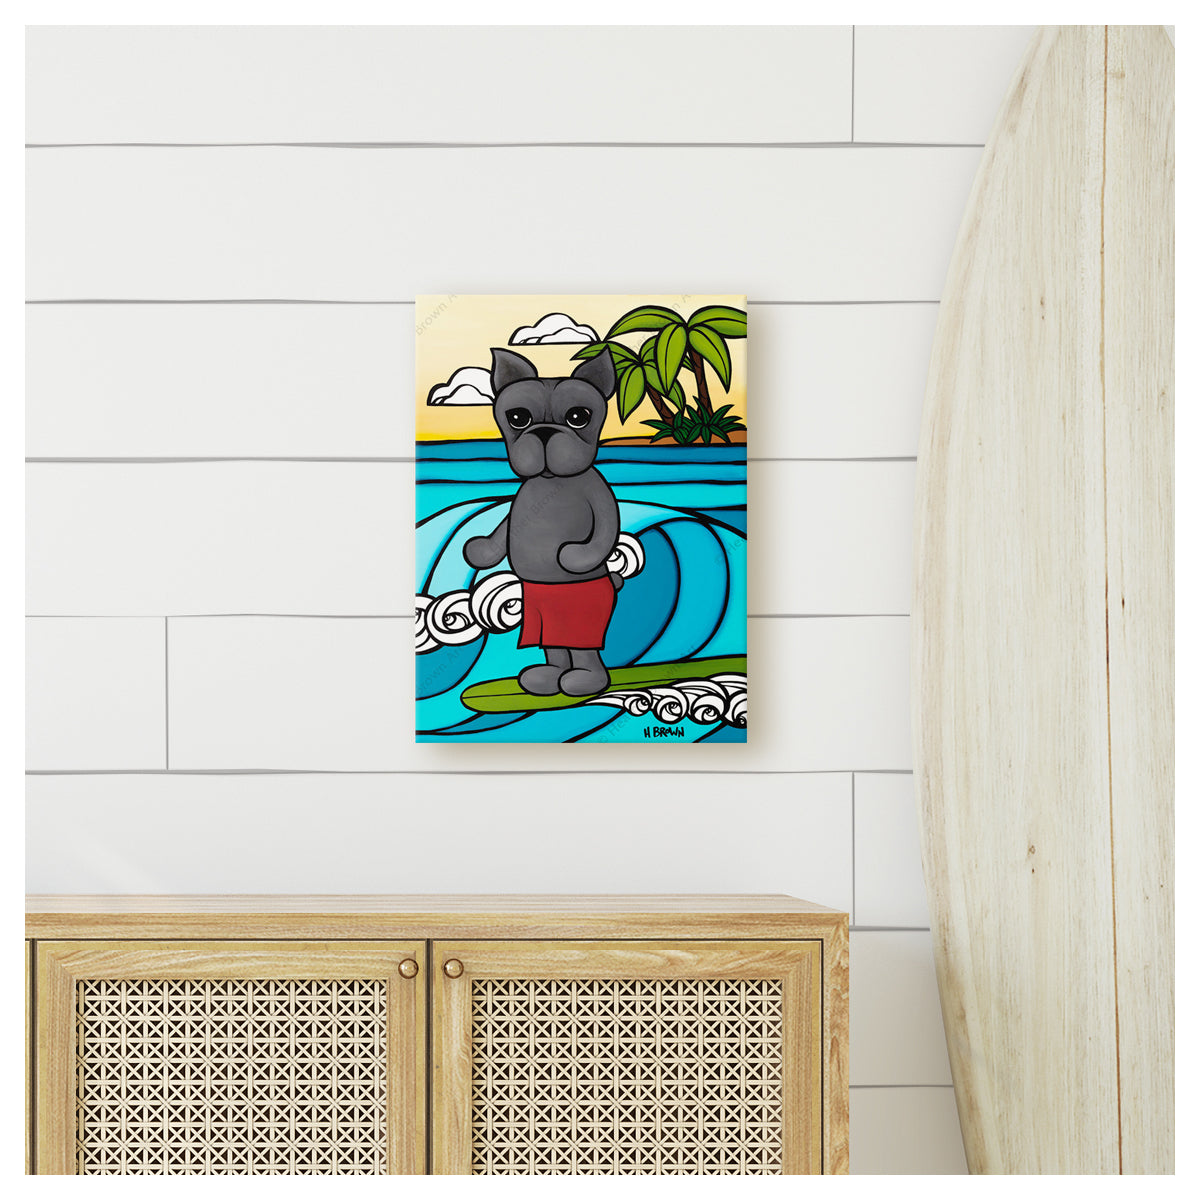 HB Henry Goes Surfing canvas giclée print by Hawaii surf artist Heather Brown